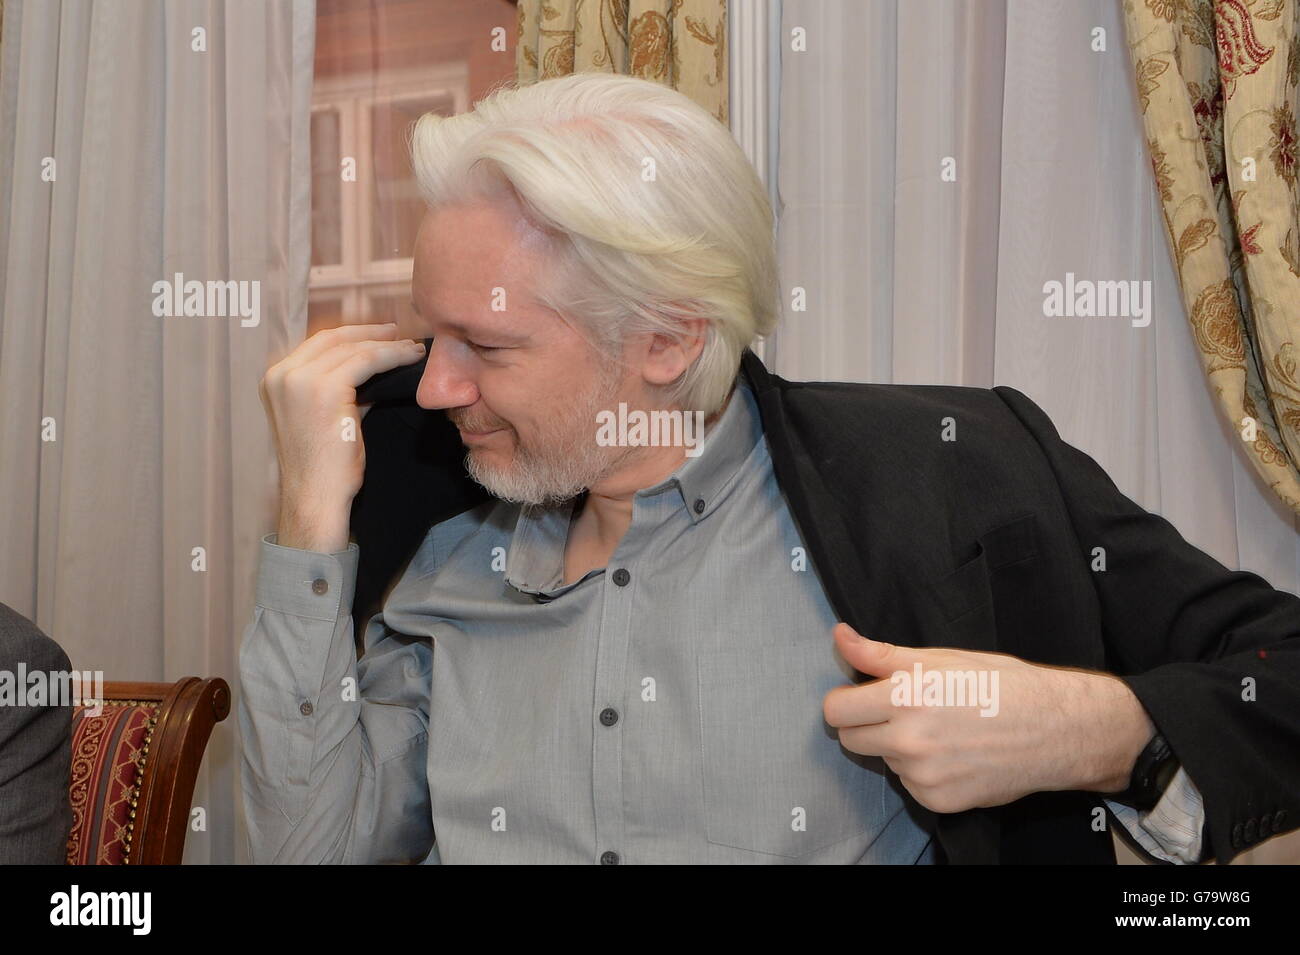 WikiLeaks founder Julian Assange puts on his jacket during a press conference inside the Ecuadorian Embassy in London, where Assange confirmed he 'will be leaving the embassy soon'. Stock Photo